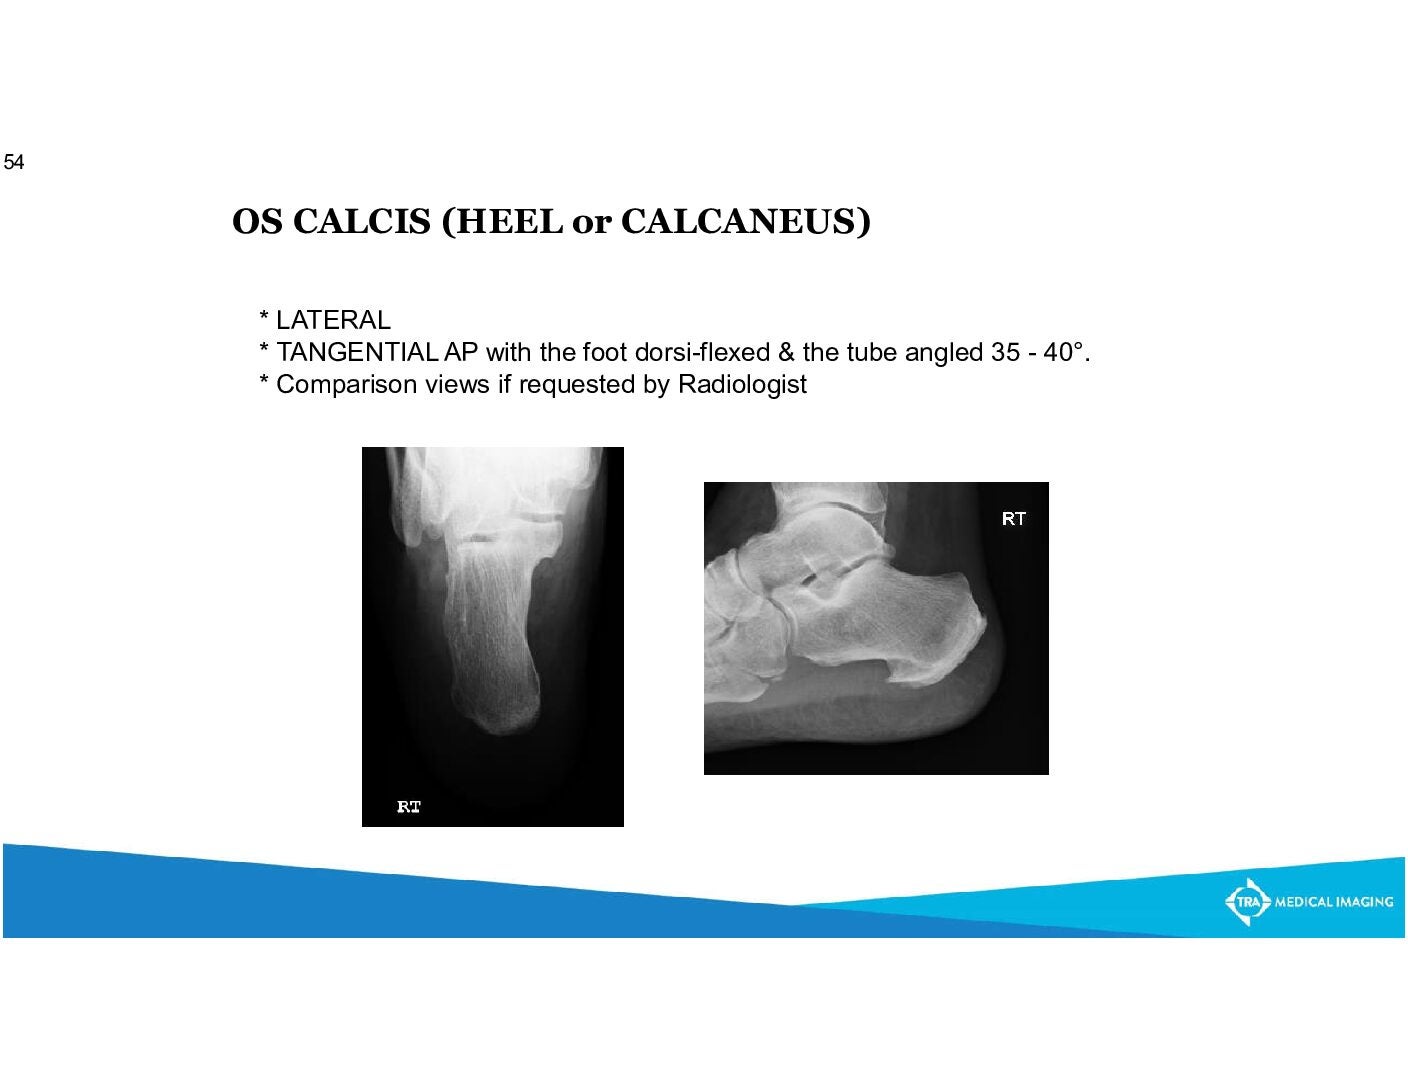 Minimally Invasive Reduction of Intraarticular Calcaneal Fractures With  Percutaneous Fixation Using Cannulated Screws Versus Kirschner Wires: A  Retrospective Comparative Study - Ahmed Shams, Osama Gamal, Mohamed Kamal  Mesregah, 2023